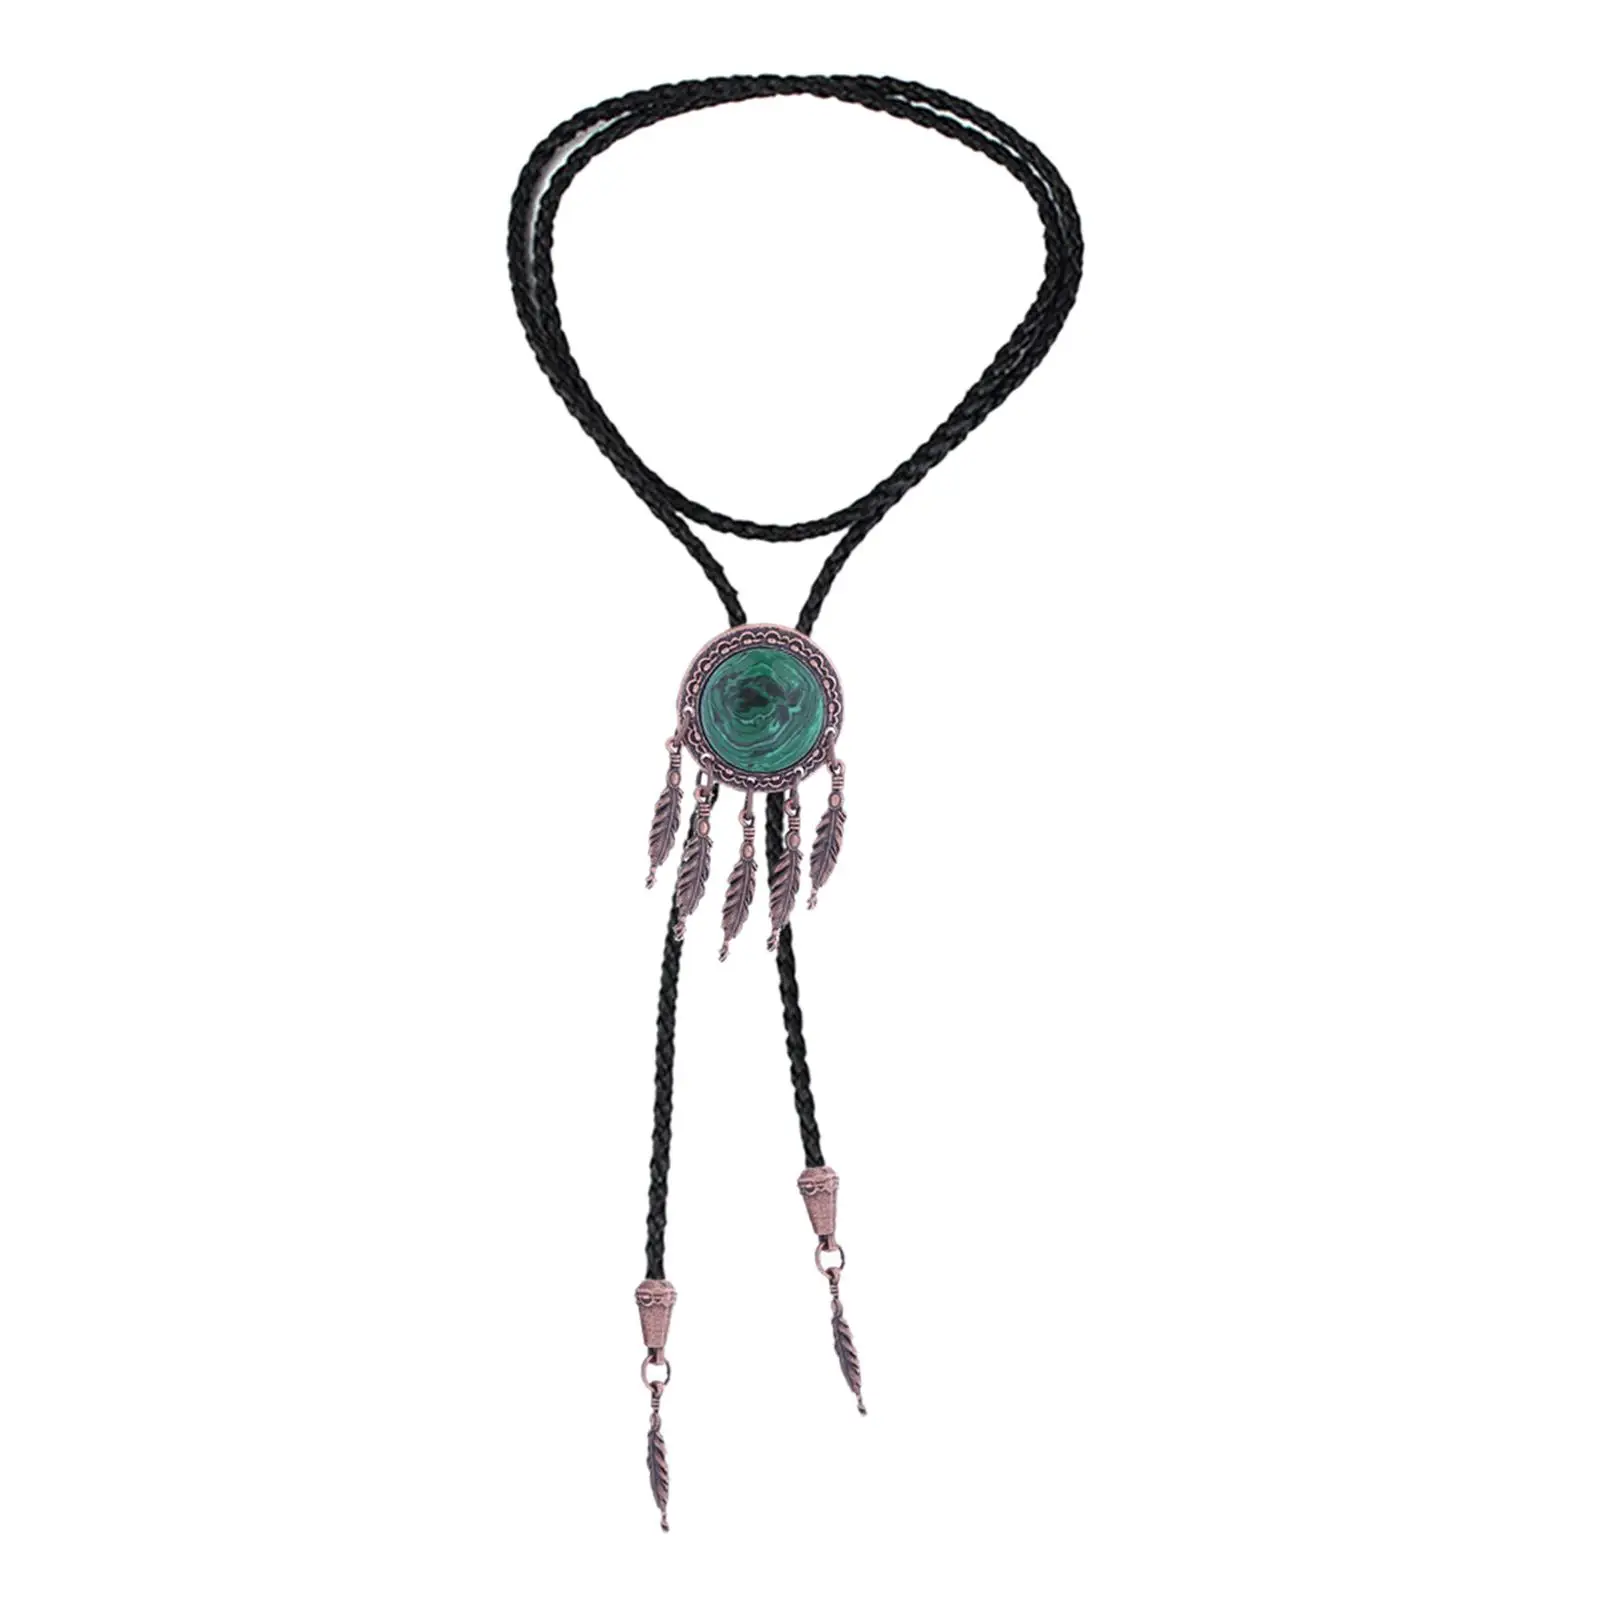 Retro Bolo Tie Green Pendant Necktie PU Leather Men Women Gift Adjustable Costume Shirt Chain Necklace Tie for Party Birthday